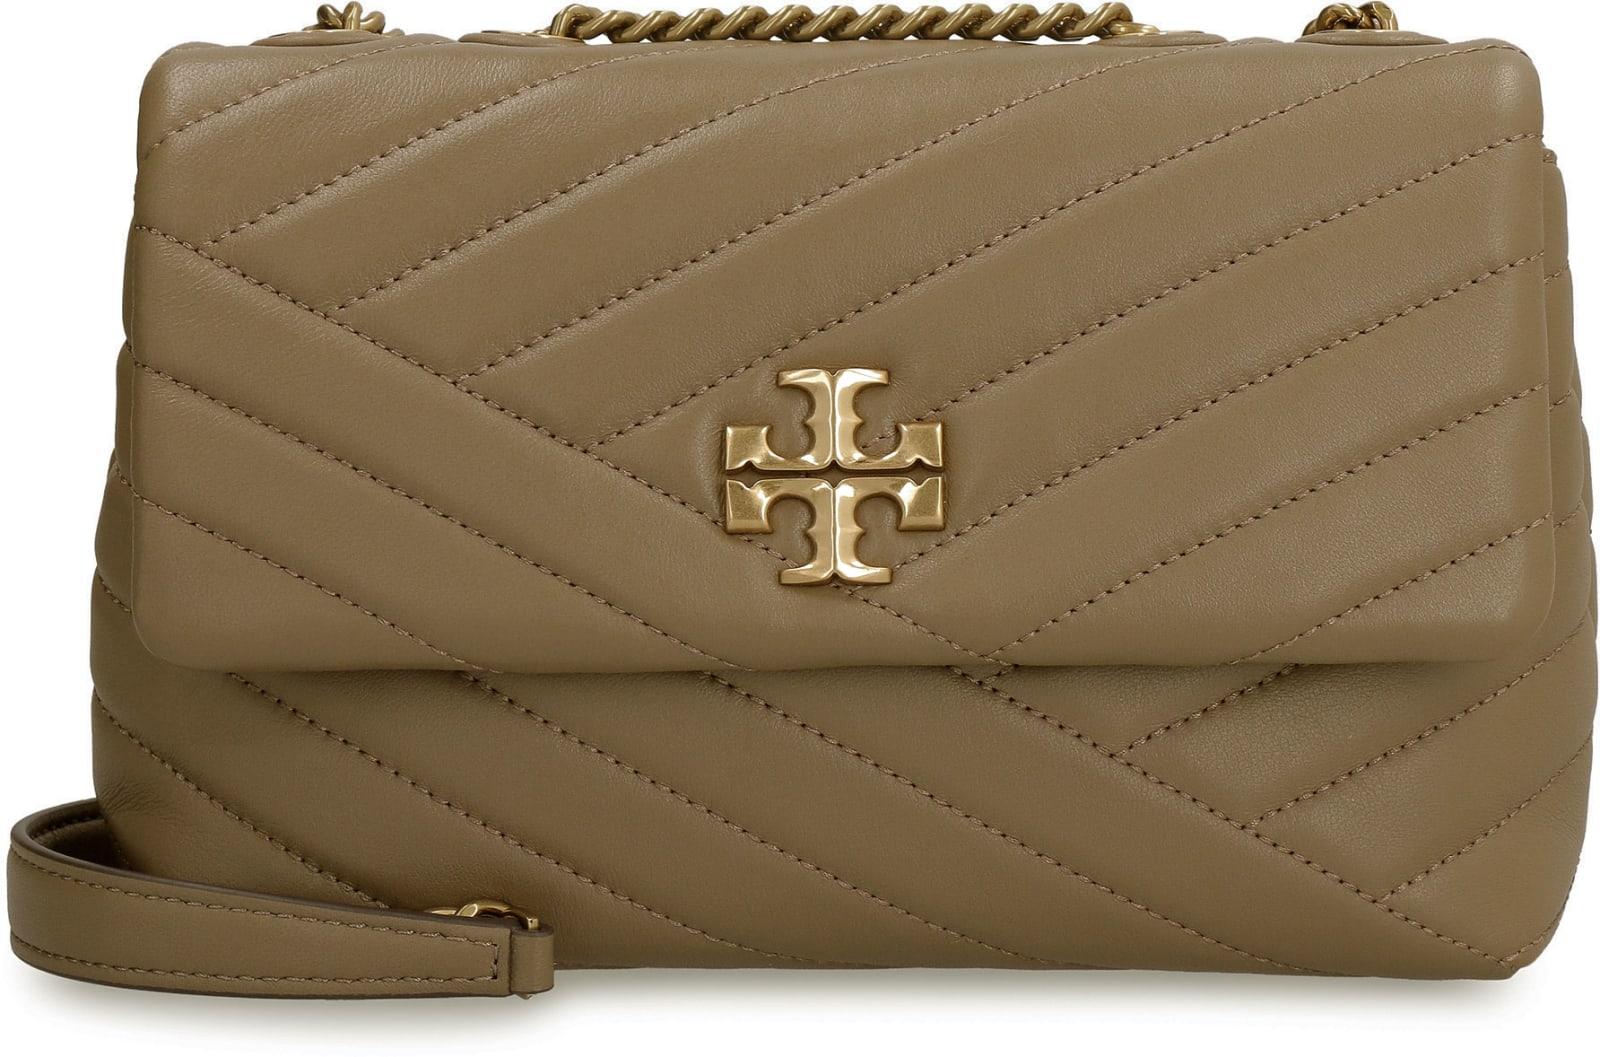 Tory Burch Kira Quilted Leather Shoulder Bag in Brown